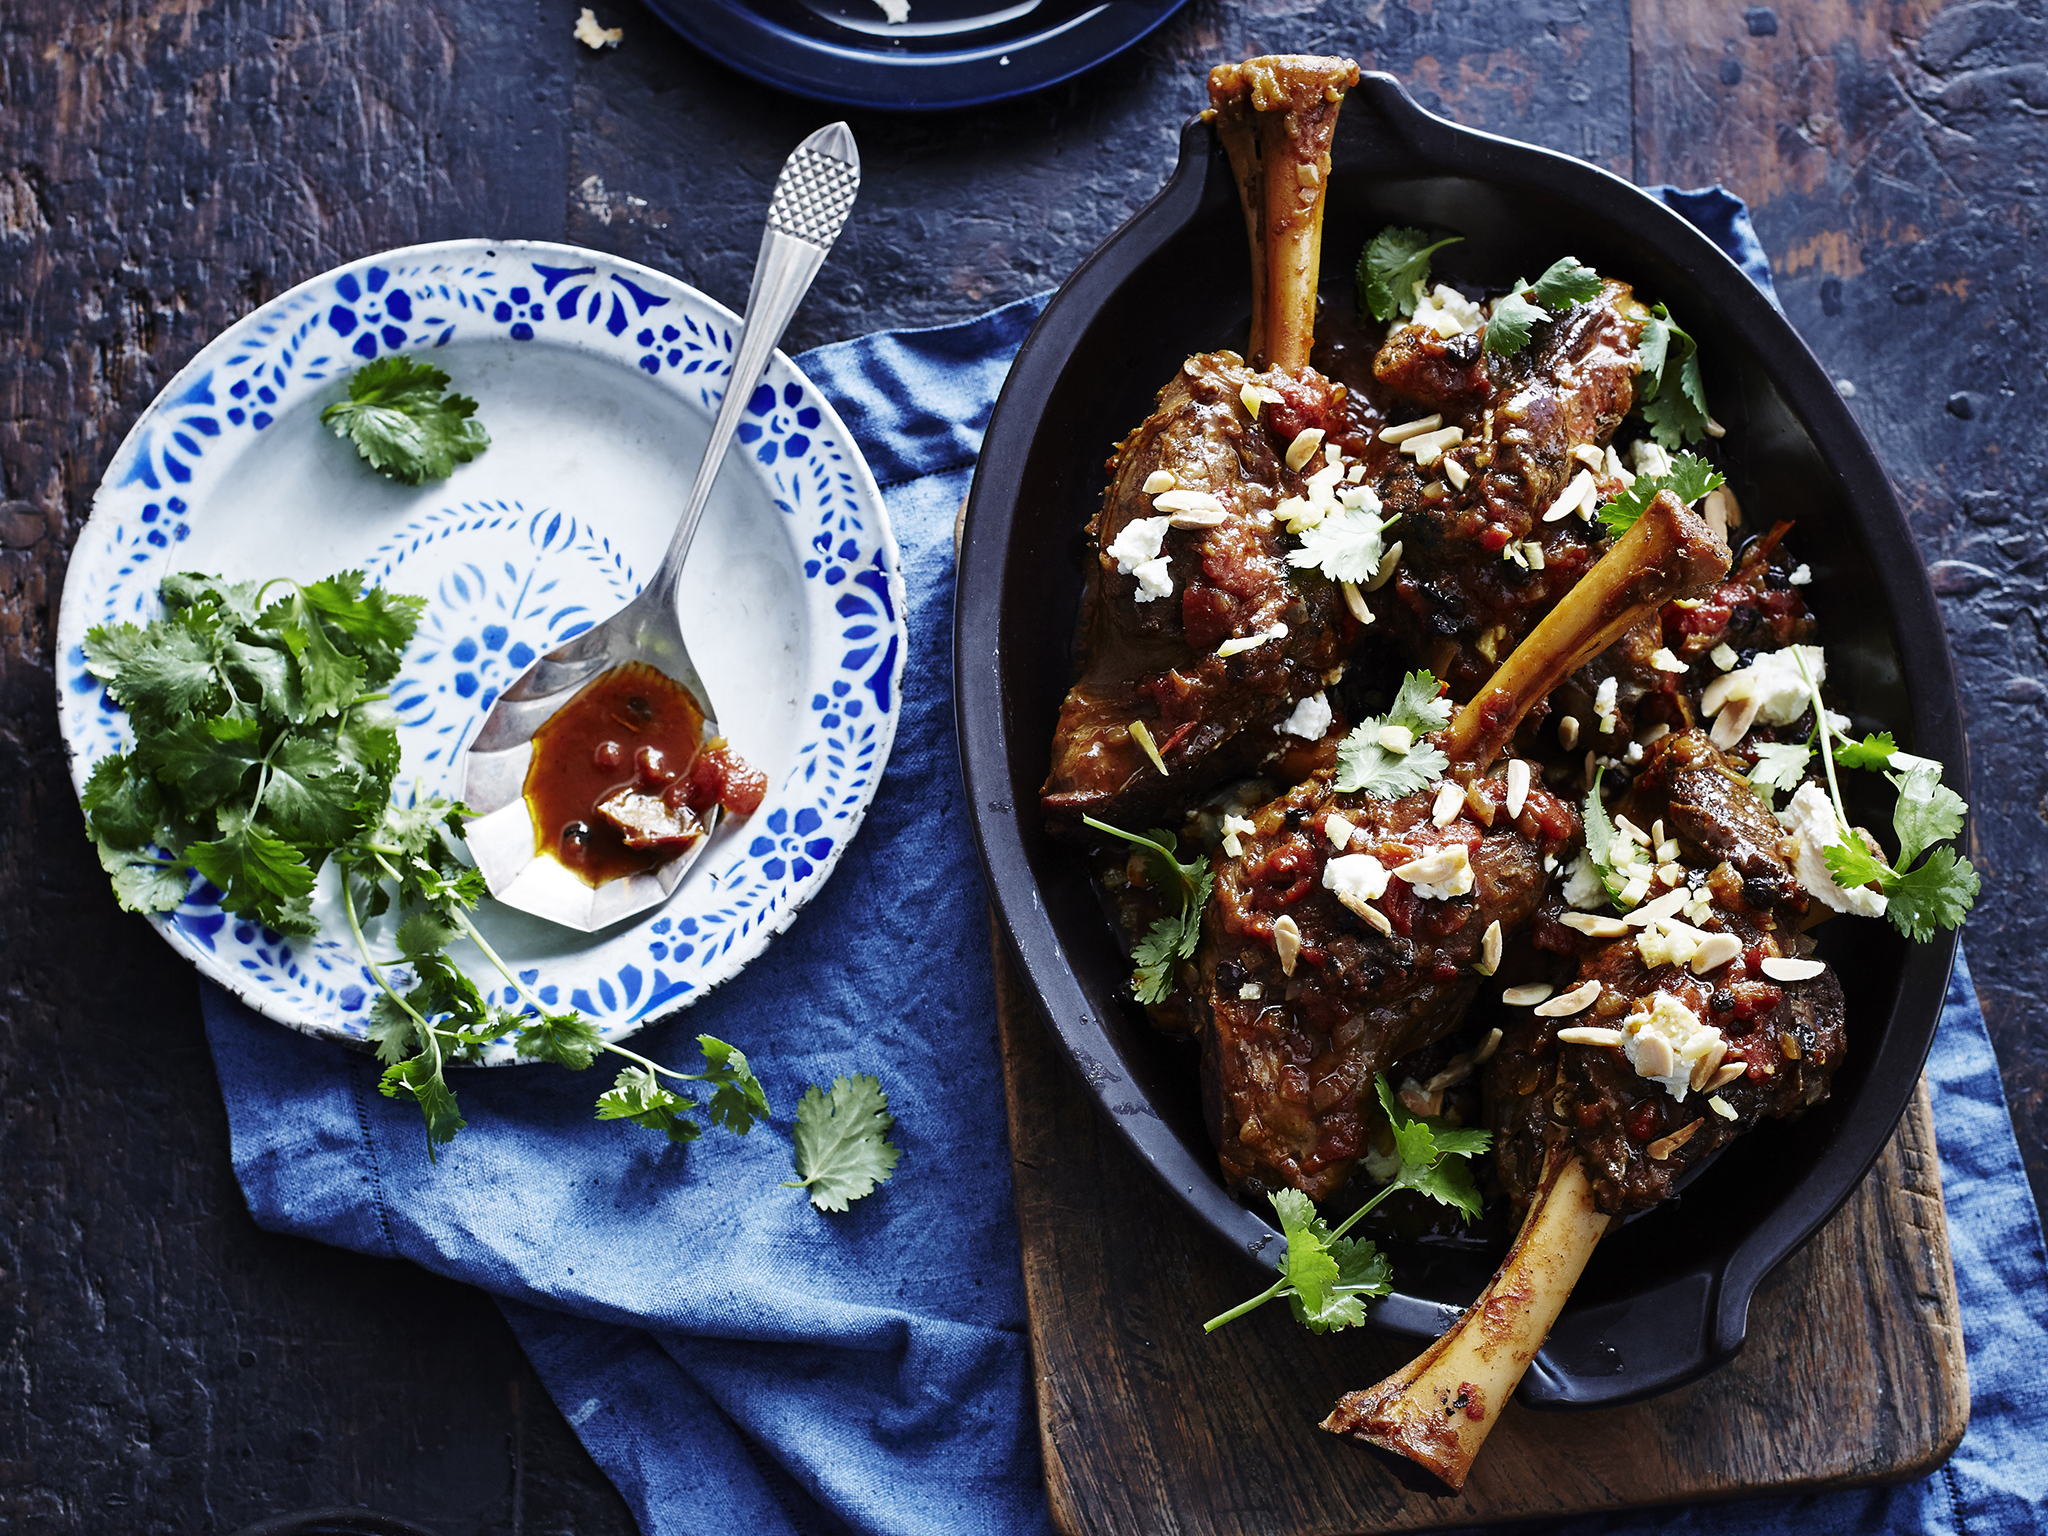 Spiced lamb shanks with almonds and feta